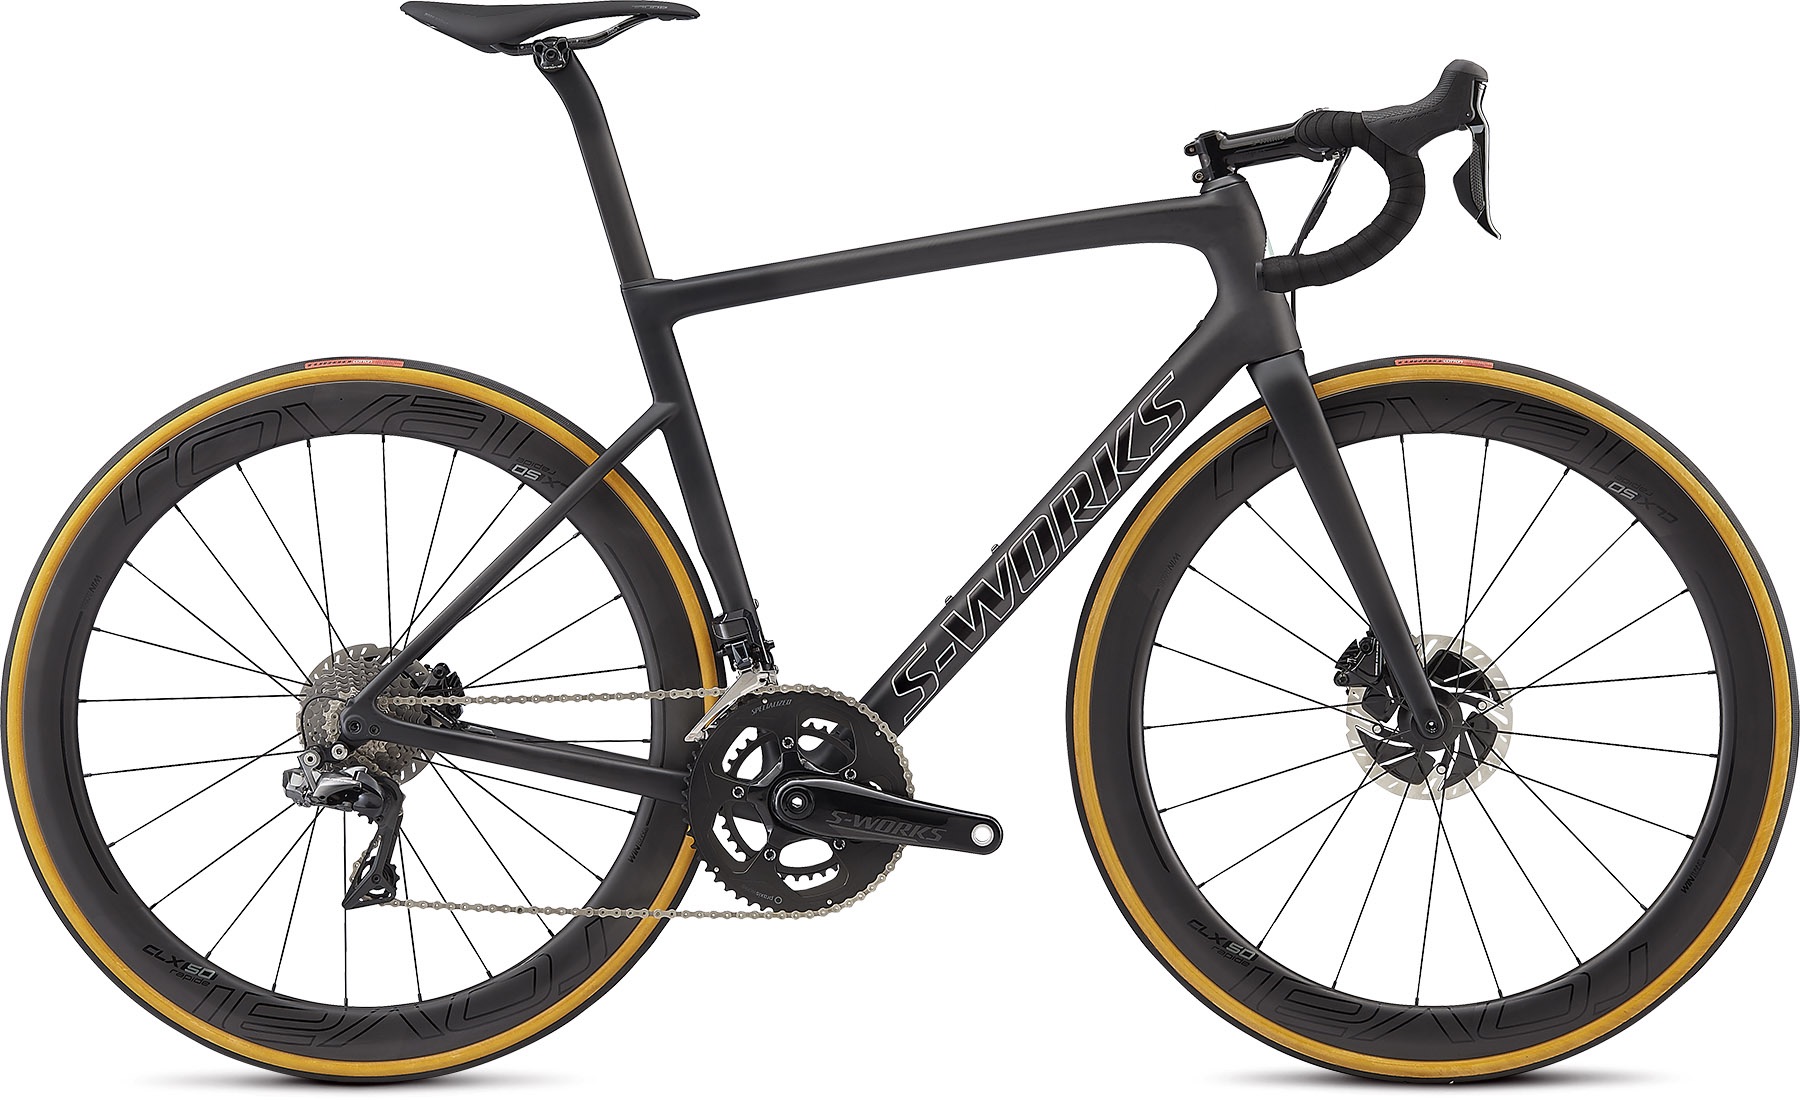 The 2018 Specialized Tarmac Disc is the latest bike in the S-works lineup.